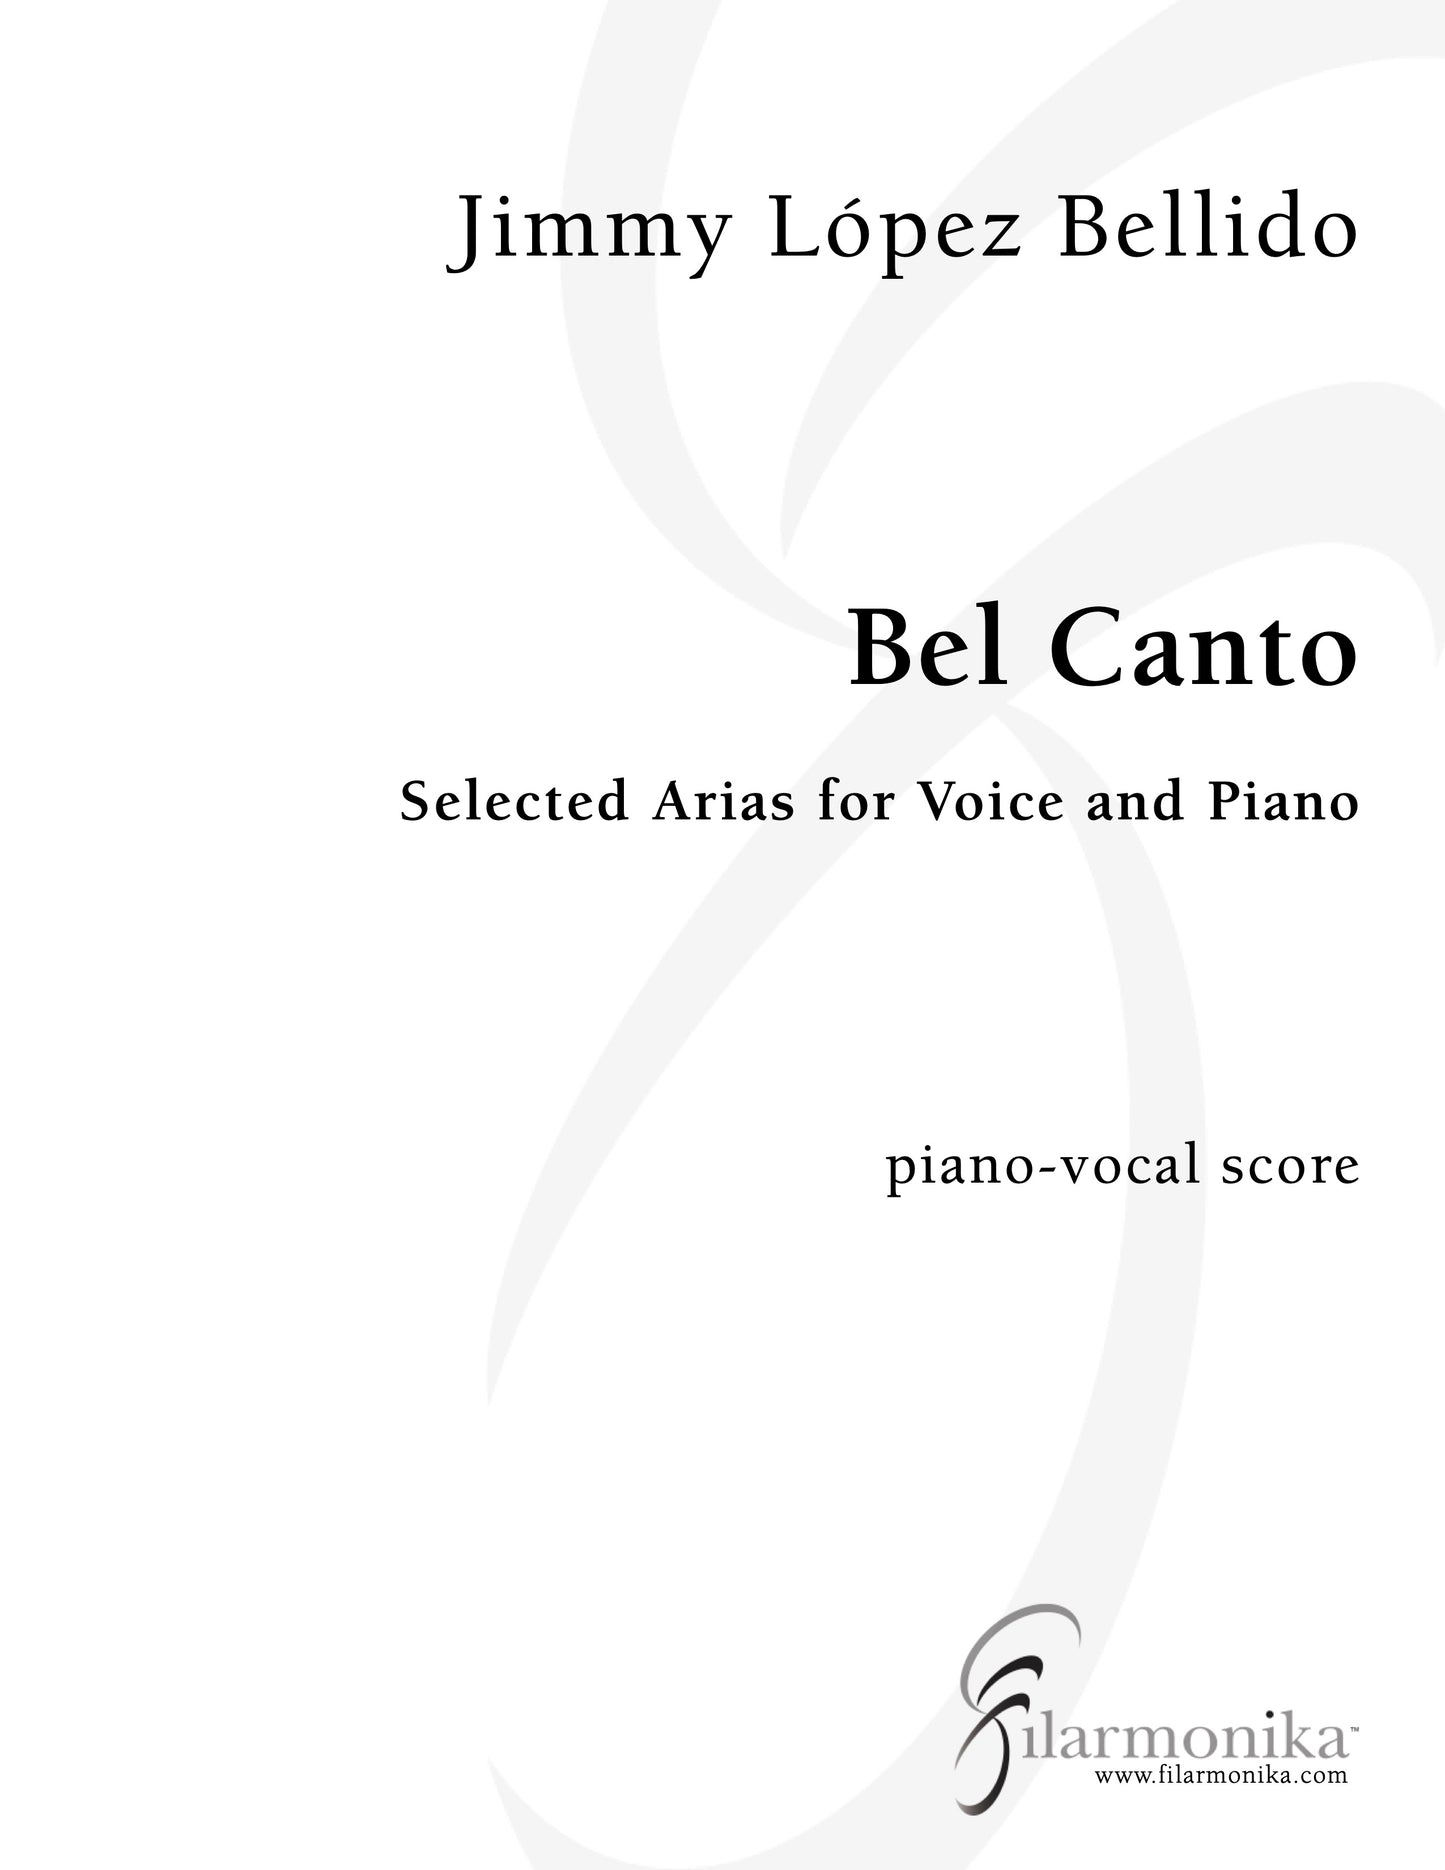 Bel Canto: Selected Arias for Voice and Piano